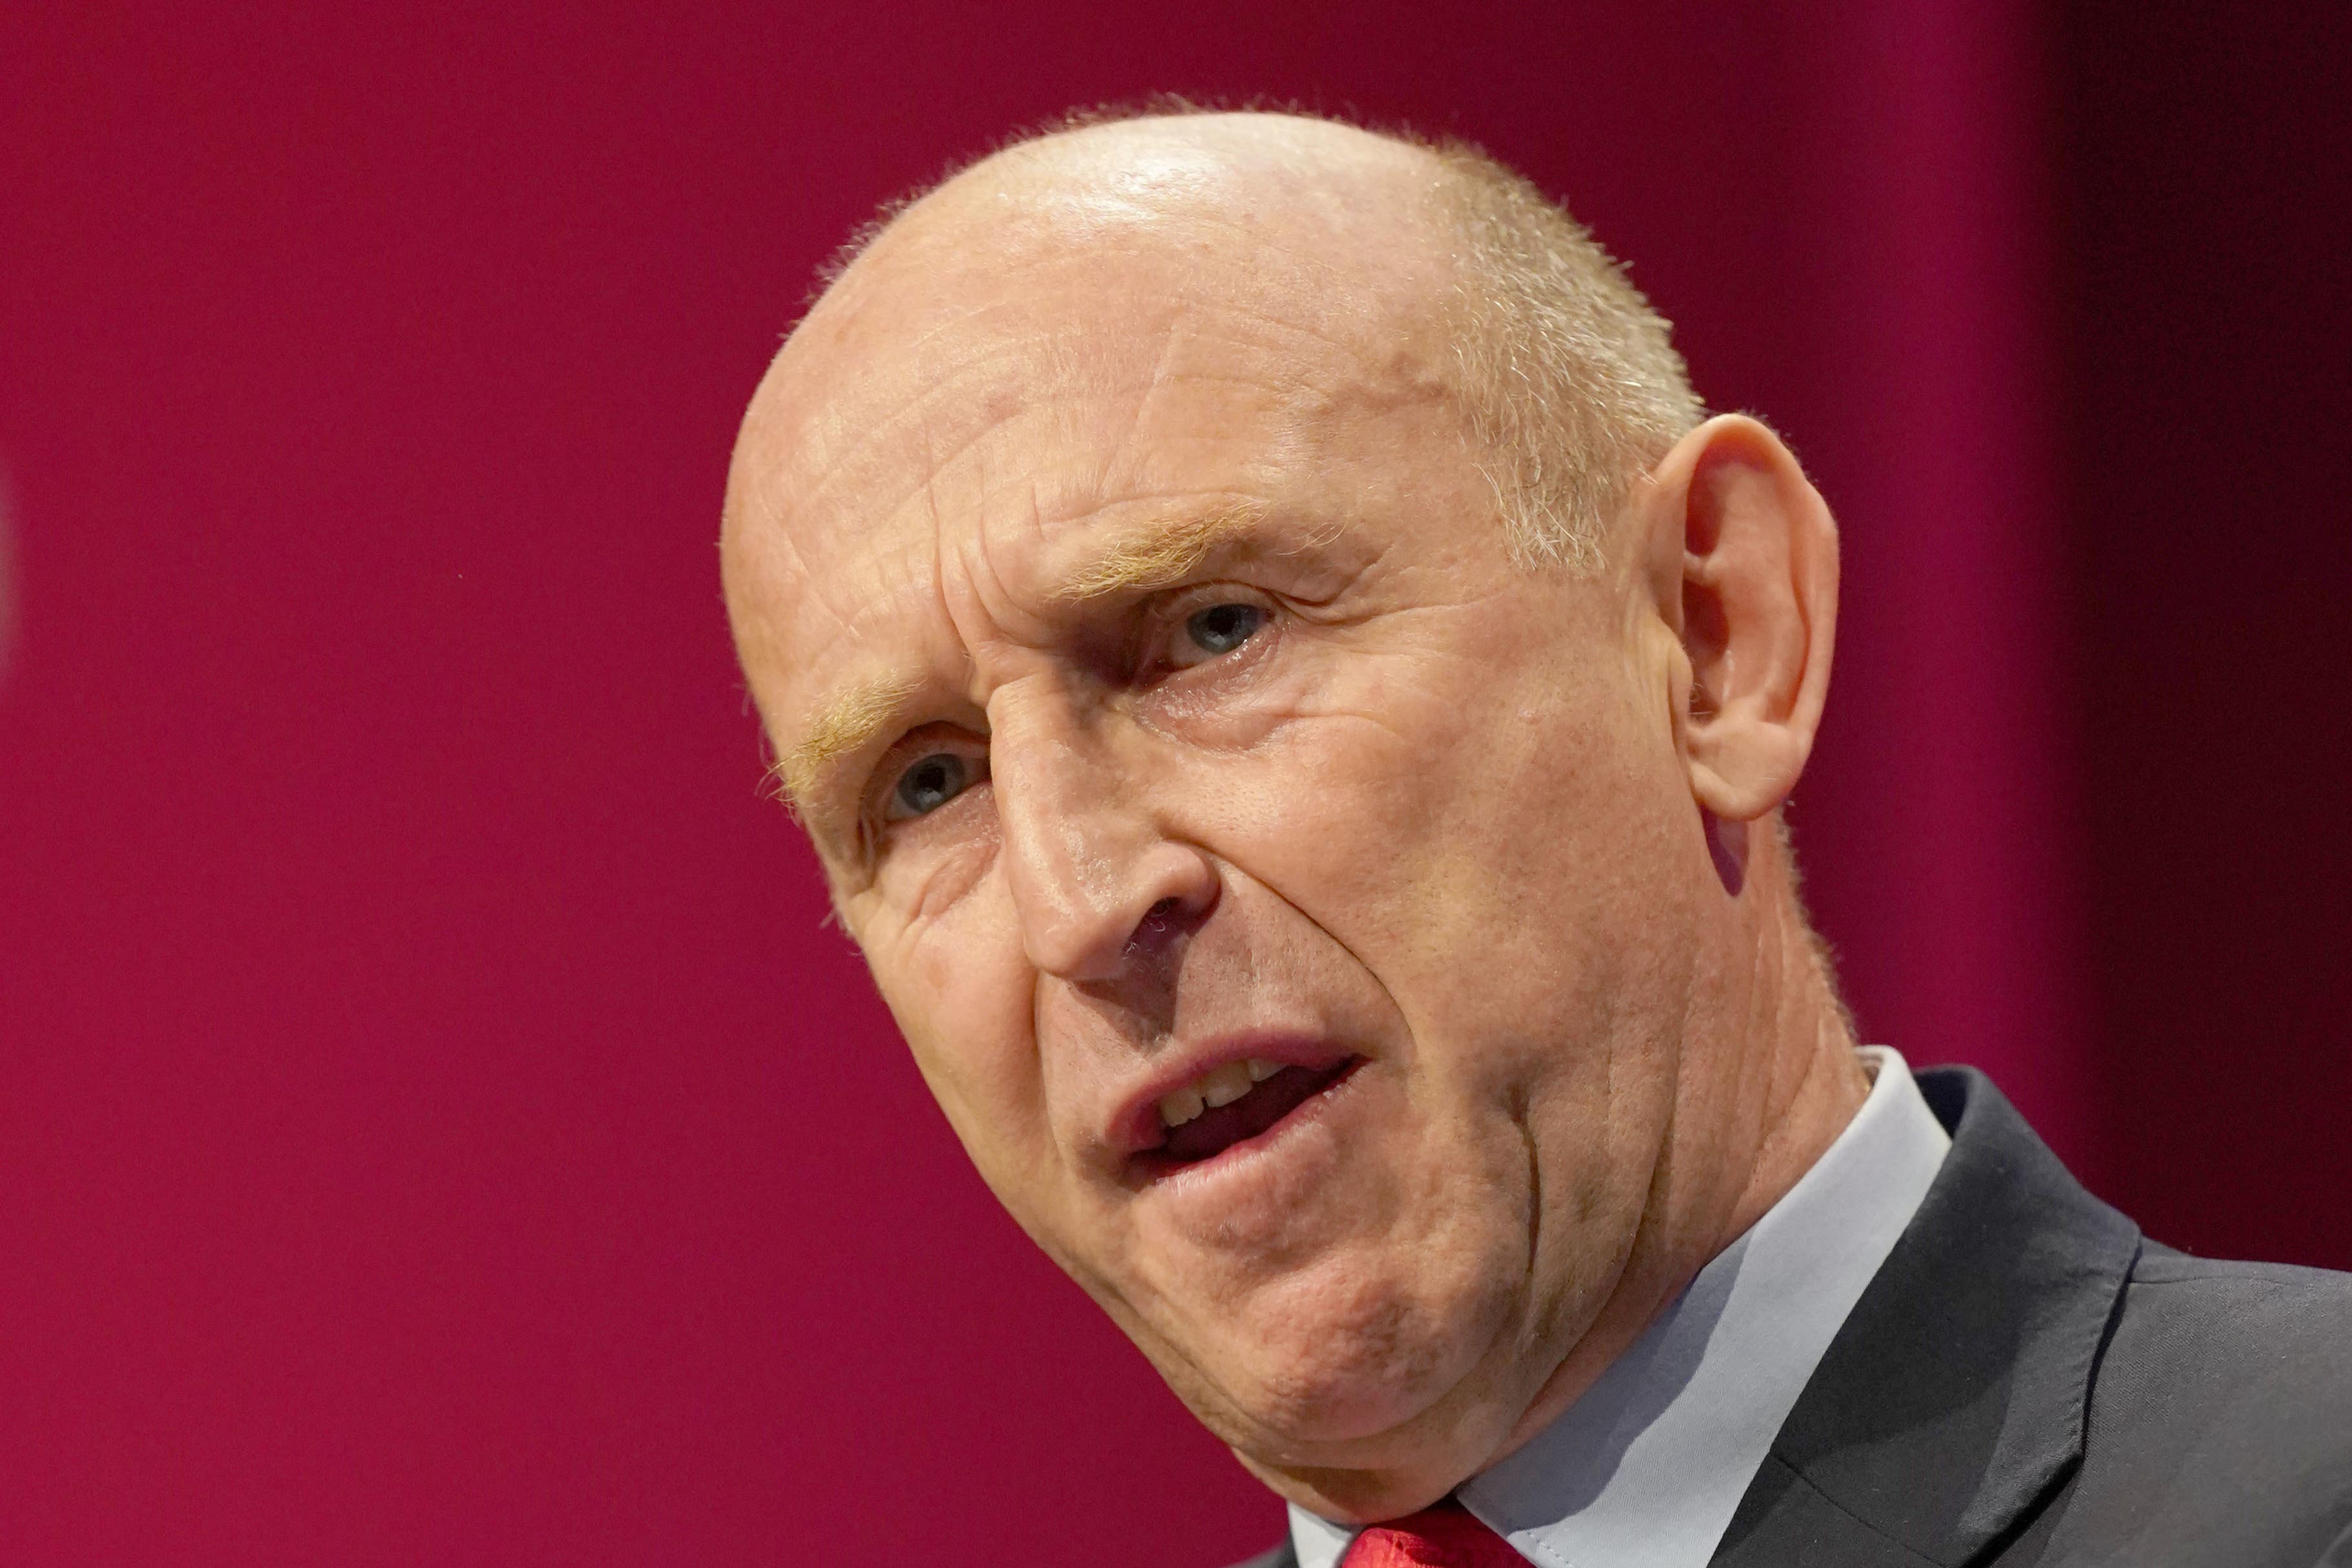 Labour’s shadow defence secretary said the party ‘strongly welcomes’ the decision